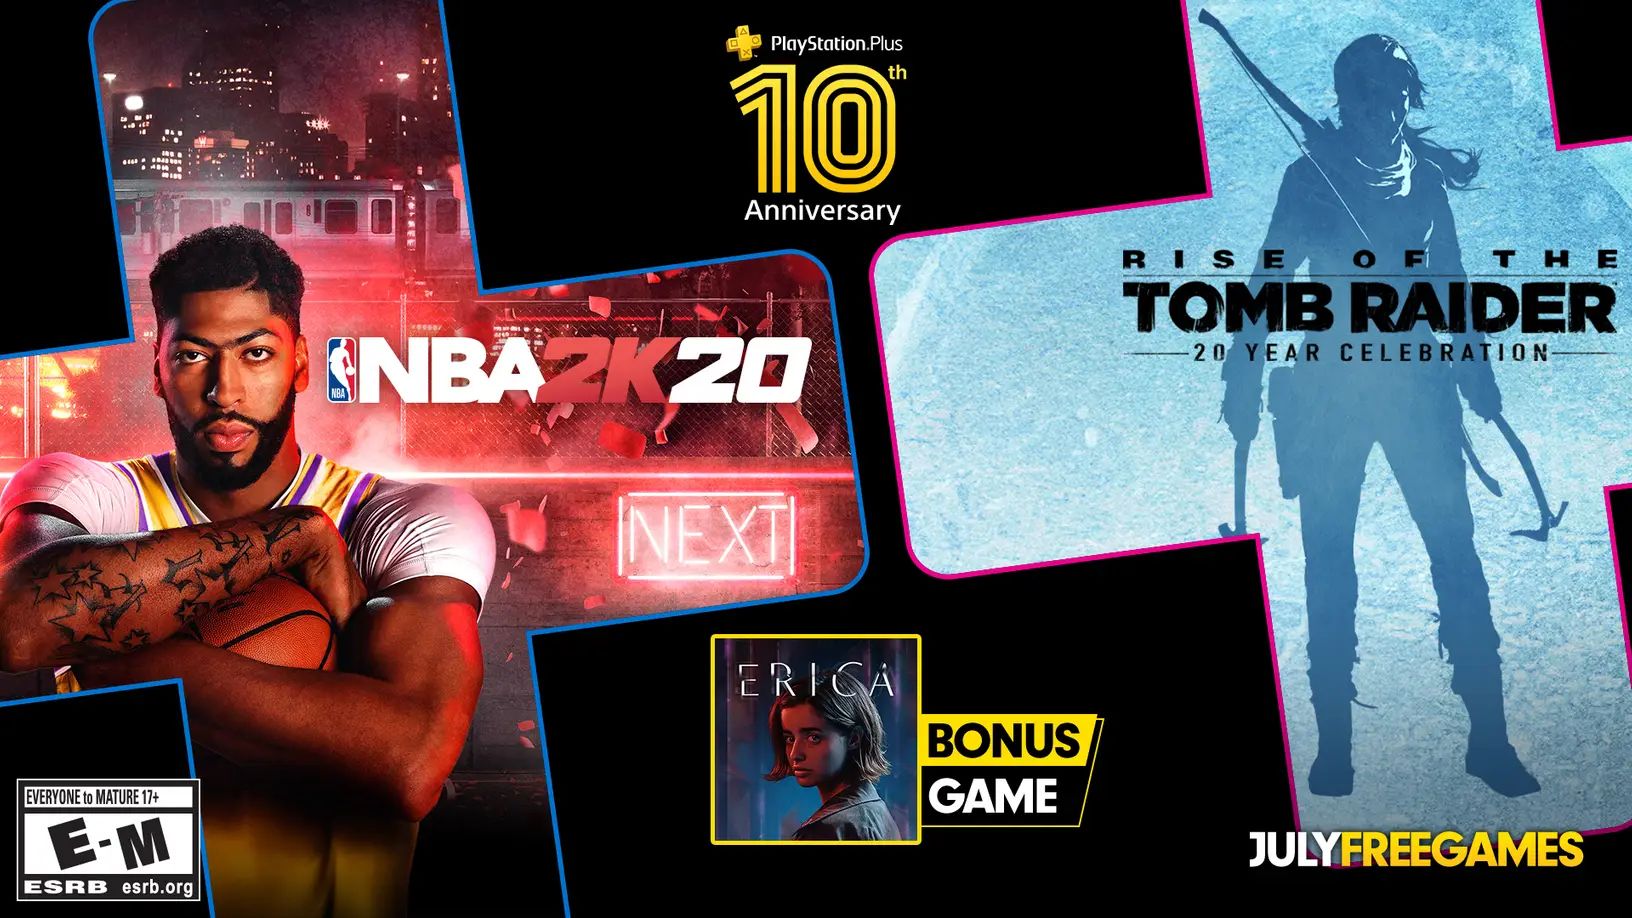 PS Plus Free Games NBA 2K20 Rise of the Tomb Raider Erica